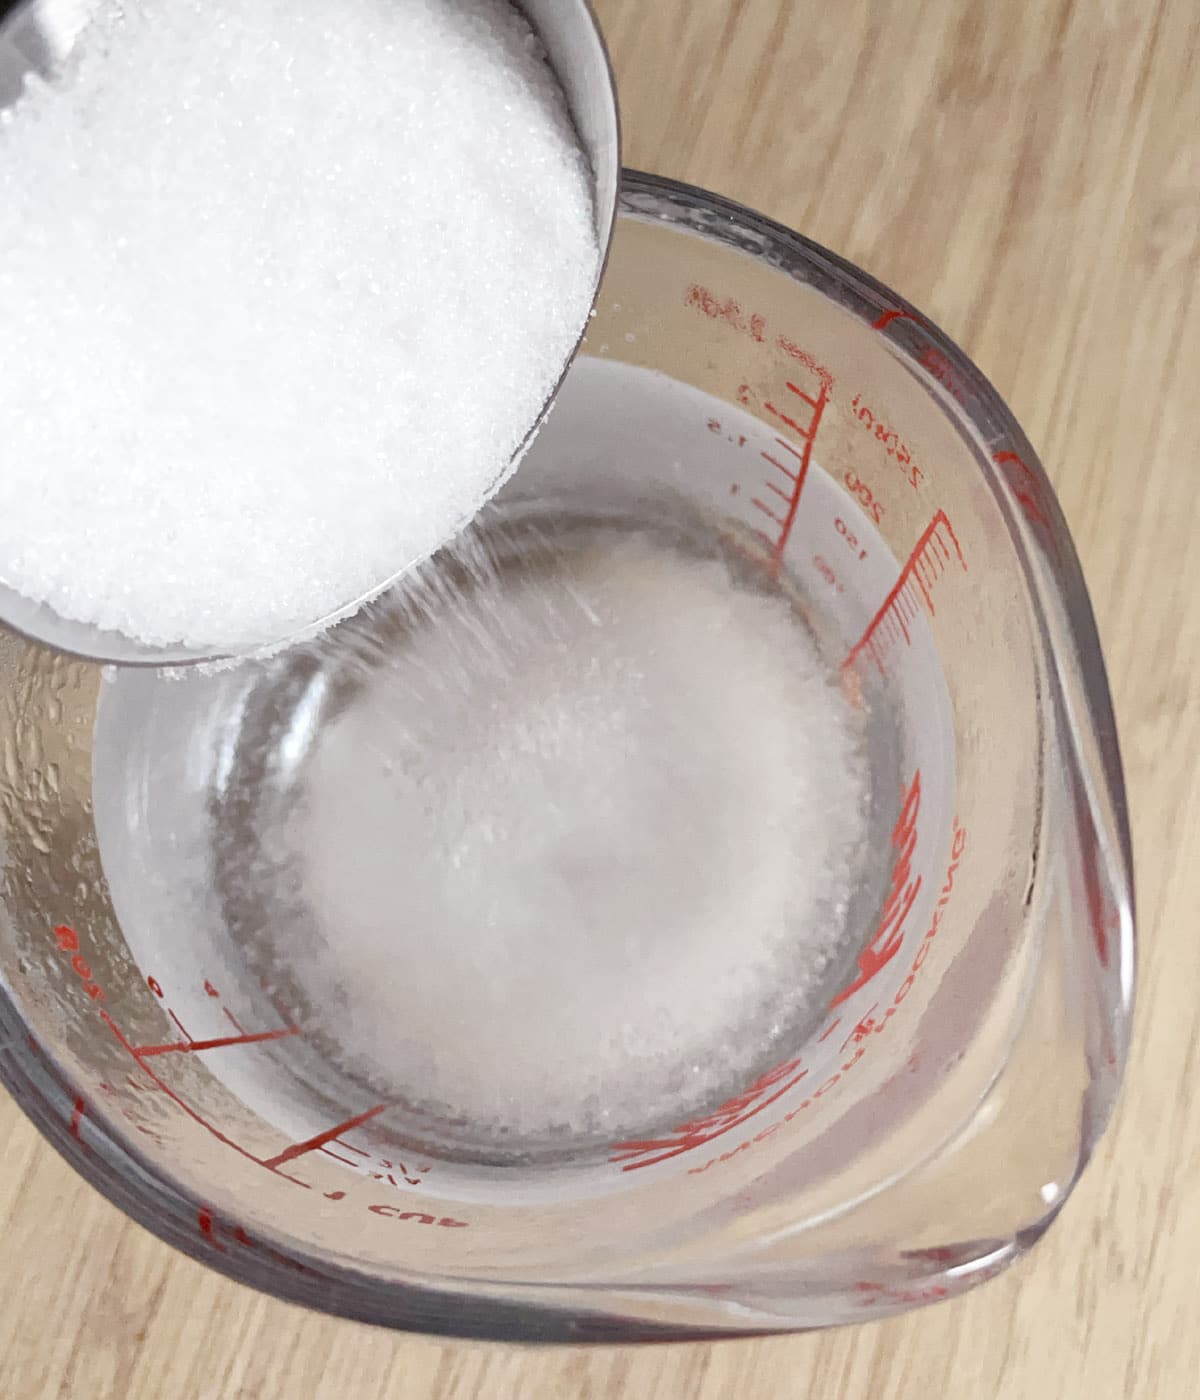 White sugar being poured into a measuring cup containing water.